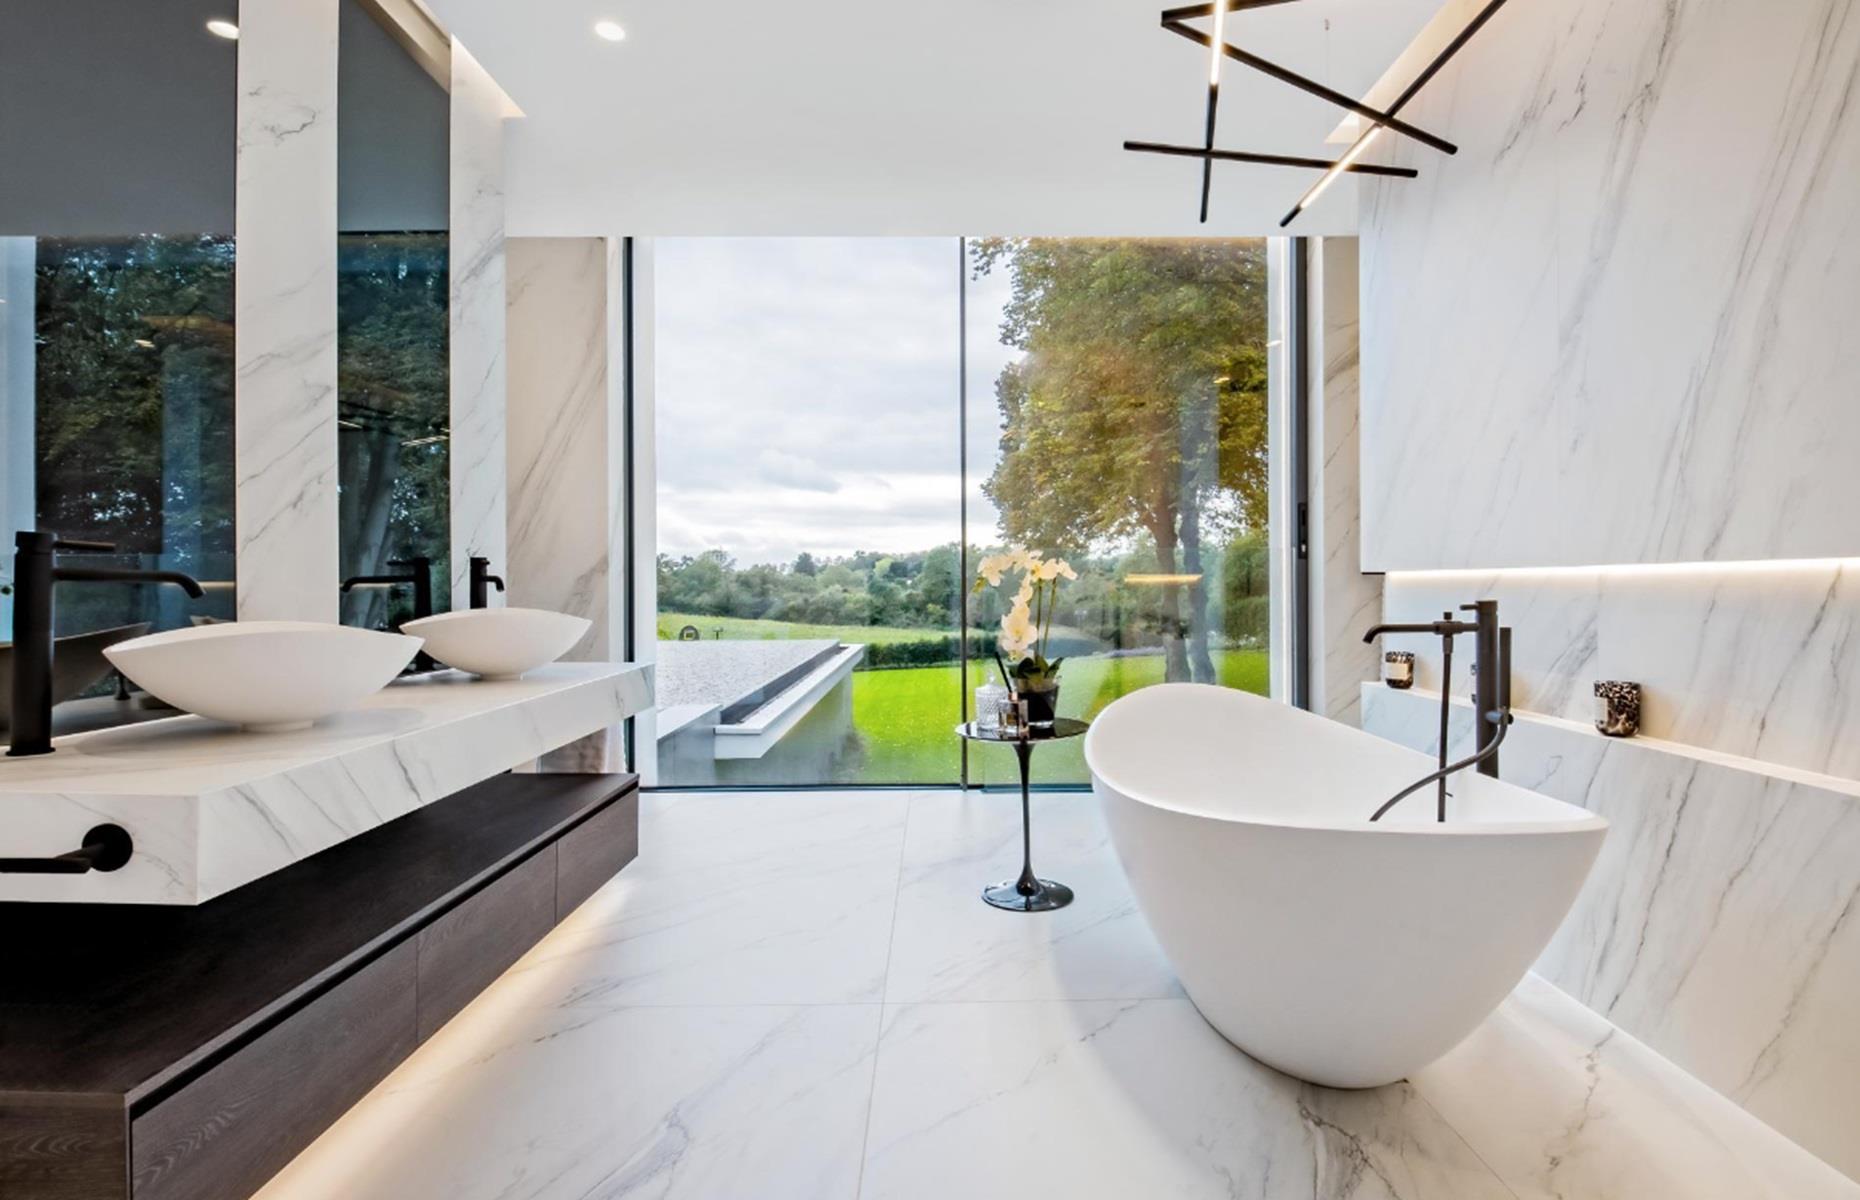 <p>On the first floor, you’ll find the master suite – one of six bedrooms – which boasts a dressing room, an ensuite marble bathroom with a free-standing tub and a balcony overlooking the garden. As you might expect, the house also comes kitted out with Crestron Home Automation, <a href="https://www.loveproperty.com/gallerylist/69774/67-stylish-lighting-ideas-to-brighten-your-home">designer lighting</a>, automated blinds and a state-of-the-art security system.</p>